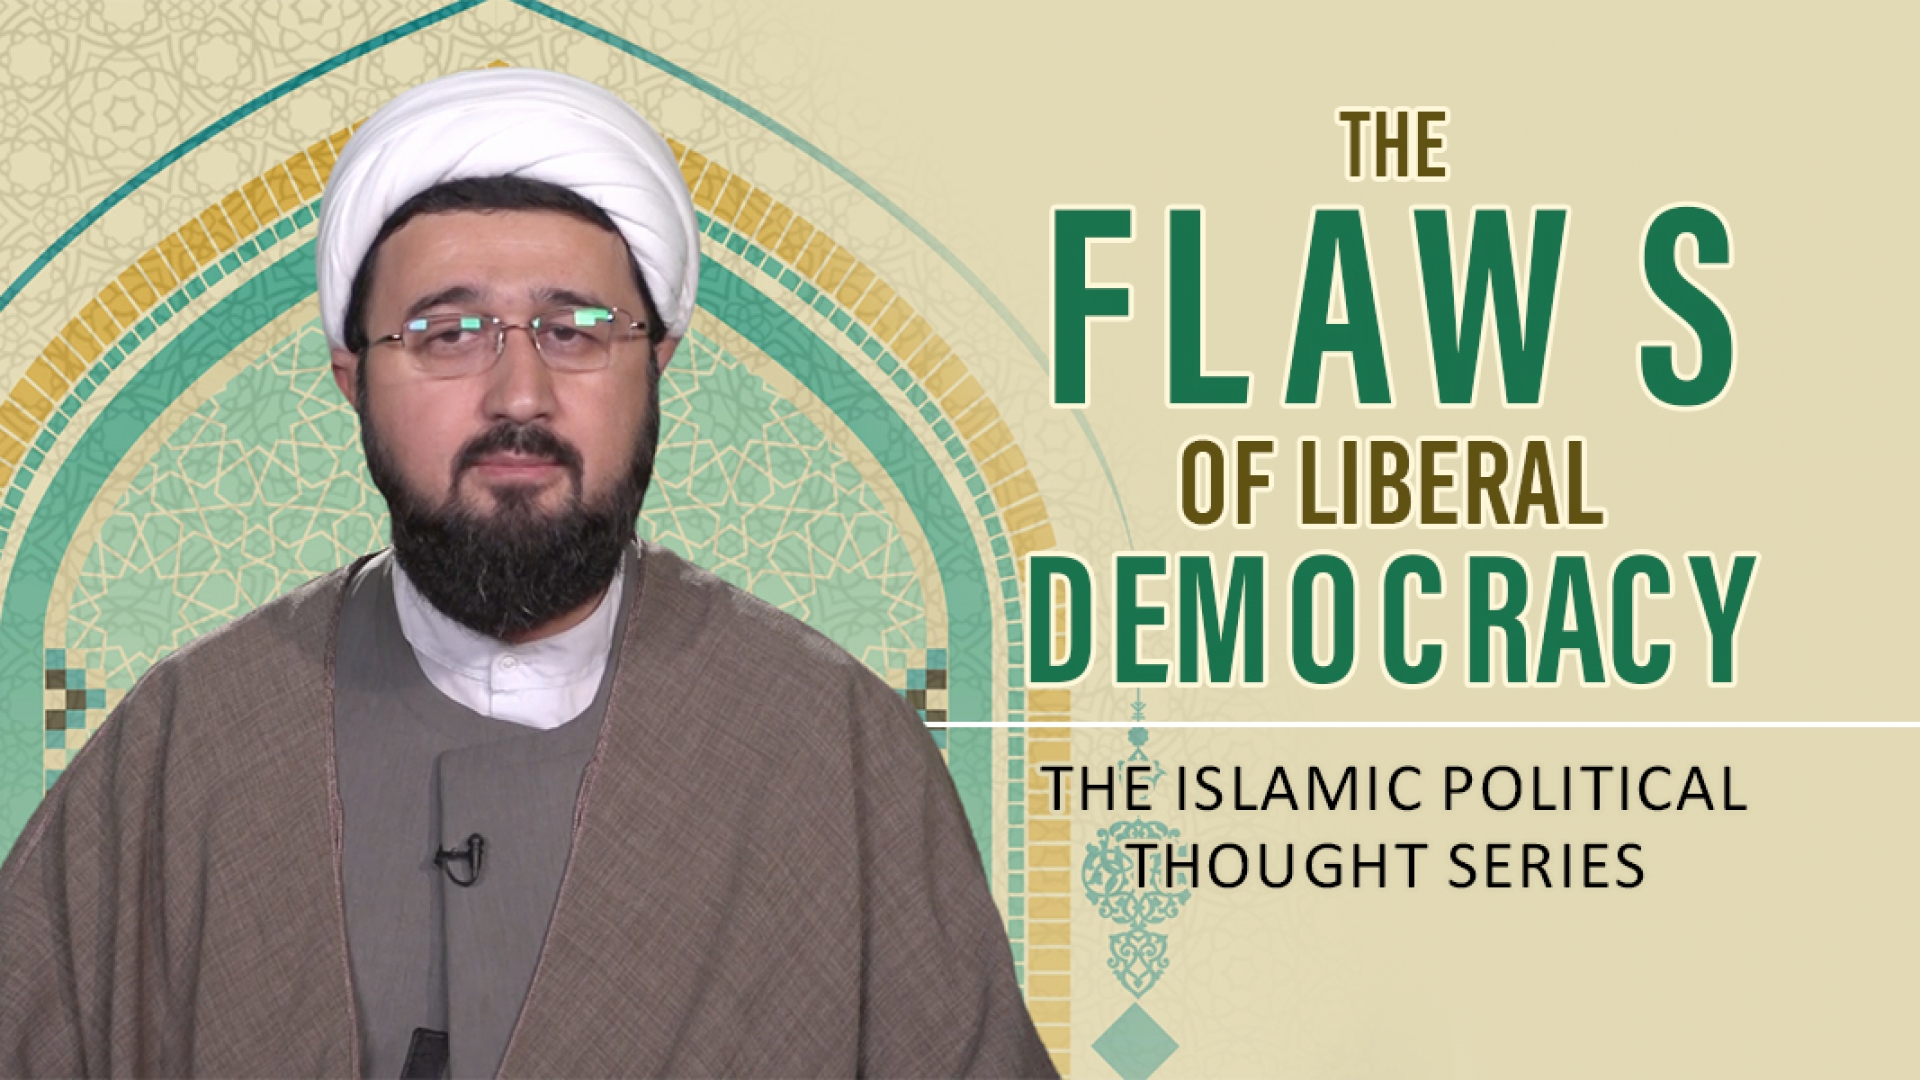 The Flaws of Liberal Democracy | The Islamic Political Thought Series | Farsi sub English